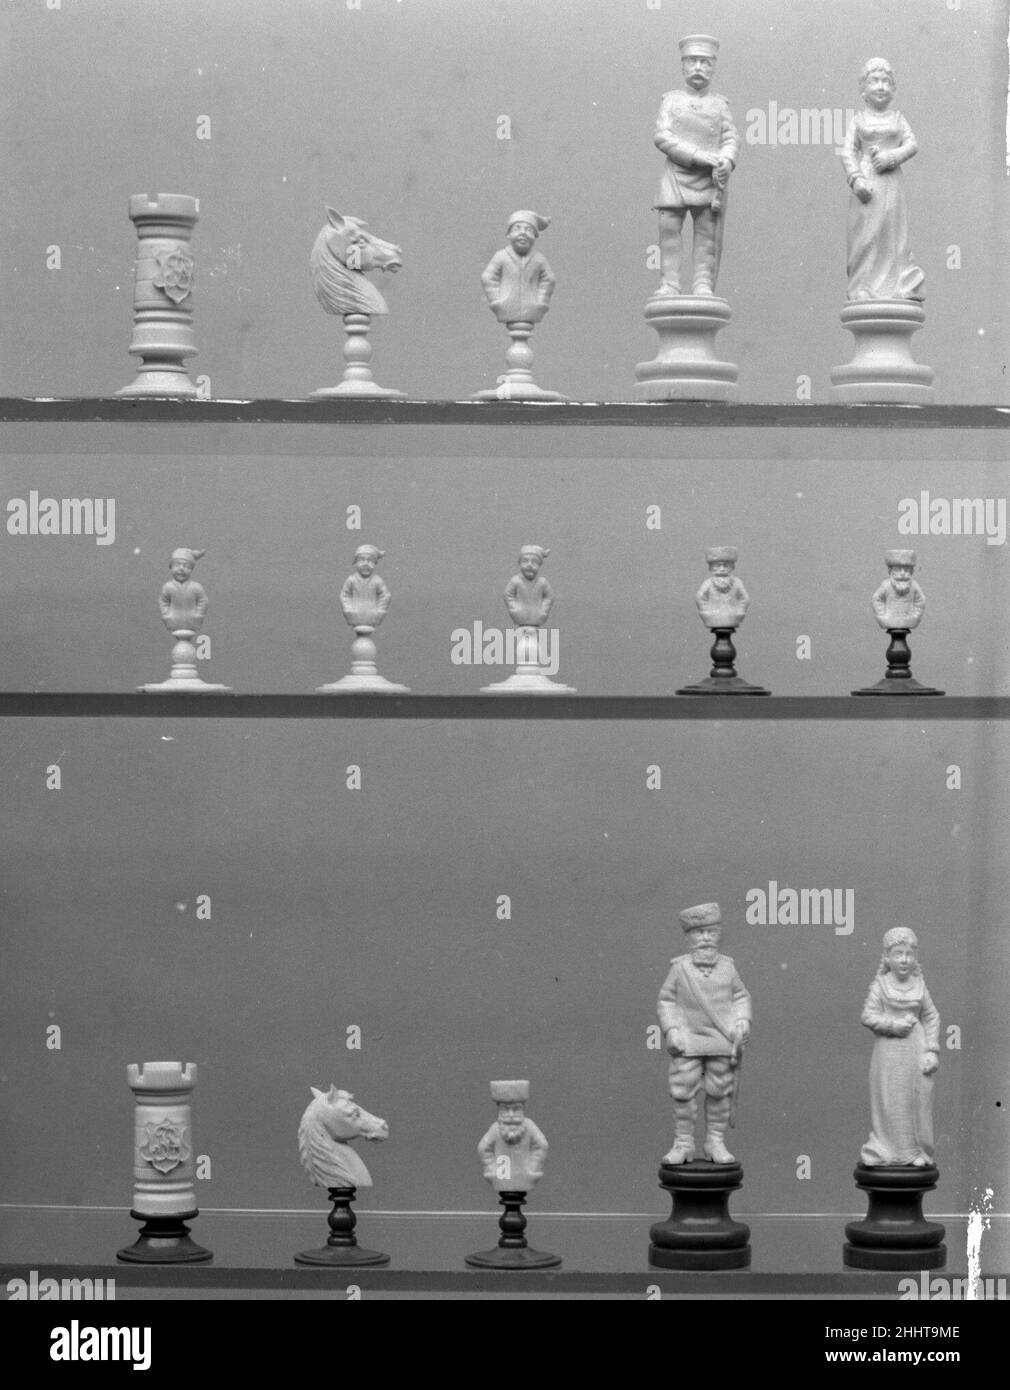 Chessmen (32) late 19th century German The two kings resemble Kaiser Wilhelm of Germany and Czar Alexander III of Russia, and resemblances to the Empress Augusta and Czarina Maria Feodorovna may be intended in the queens. The reigns of the Kaiser and Alexander III overlapped from 1887 to 1894. This period may thus be taken as the probable time in which the set was made. The initials J S in monogram within a shaped shield on the four rooks are probably those of the original owner.. Chessmen (32). German. late 19th century. Ivory. Chess Sets Stock Photo